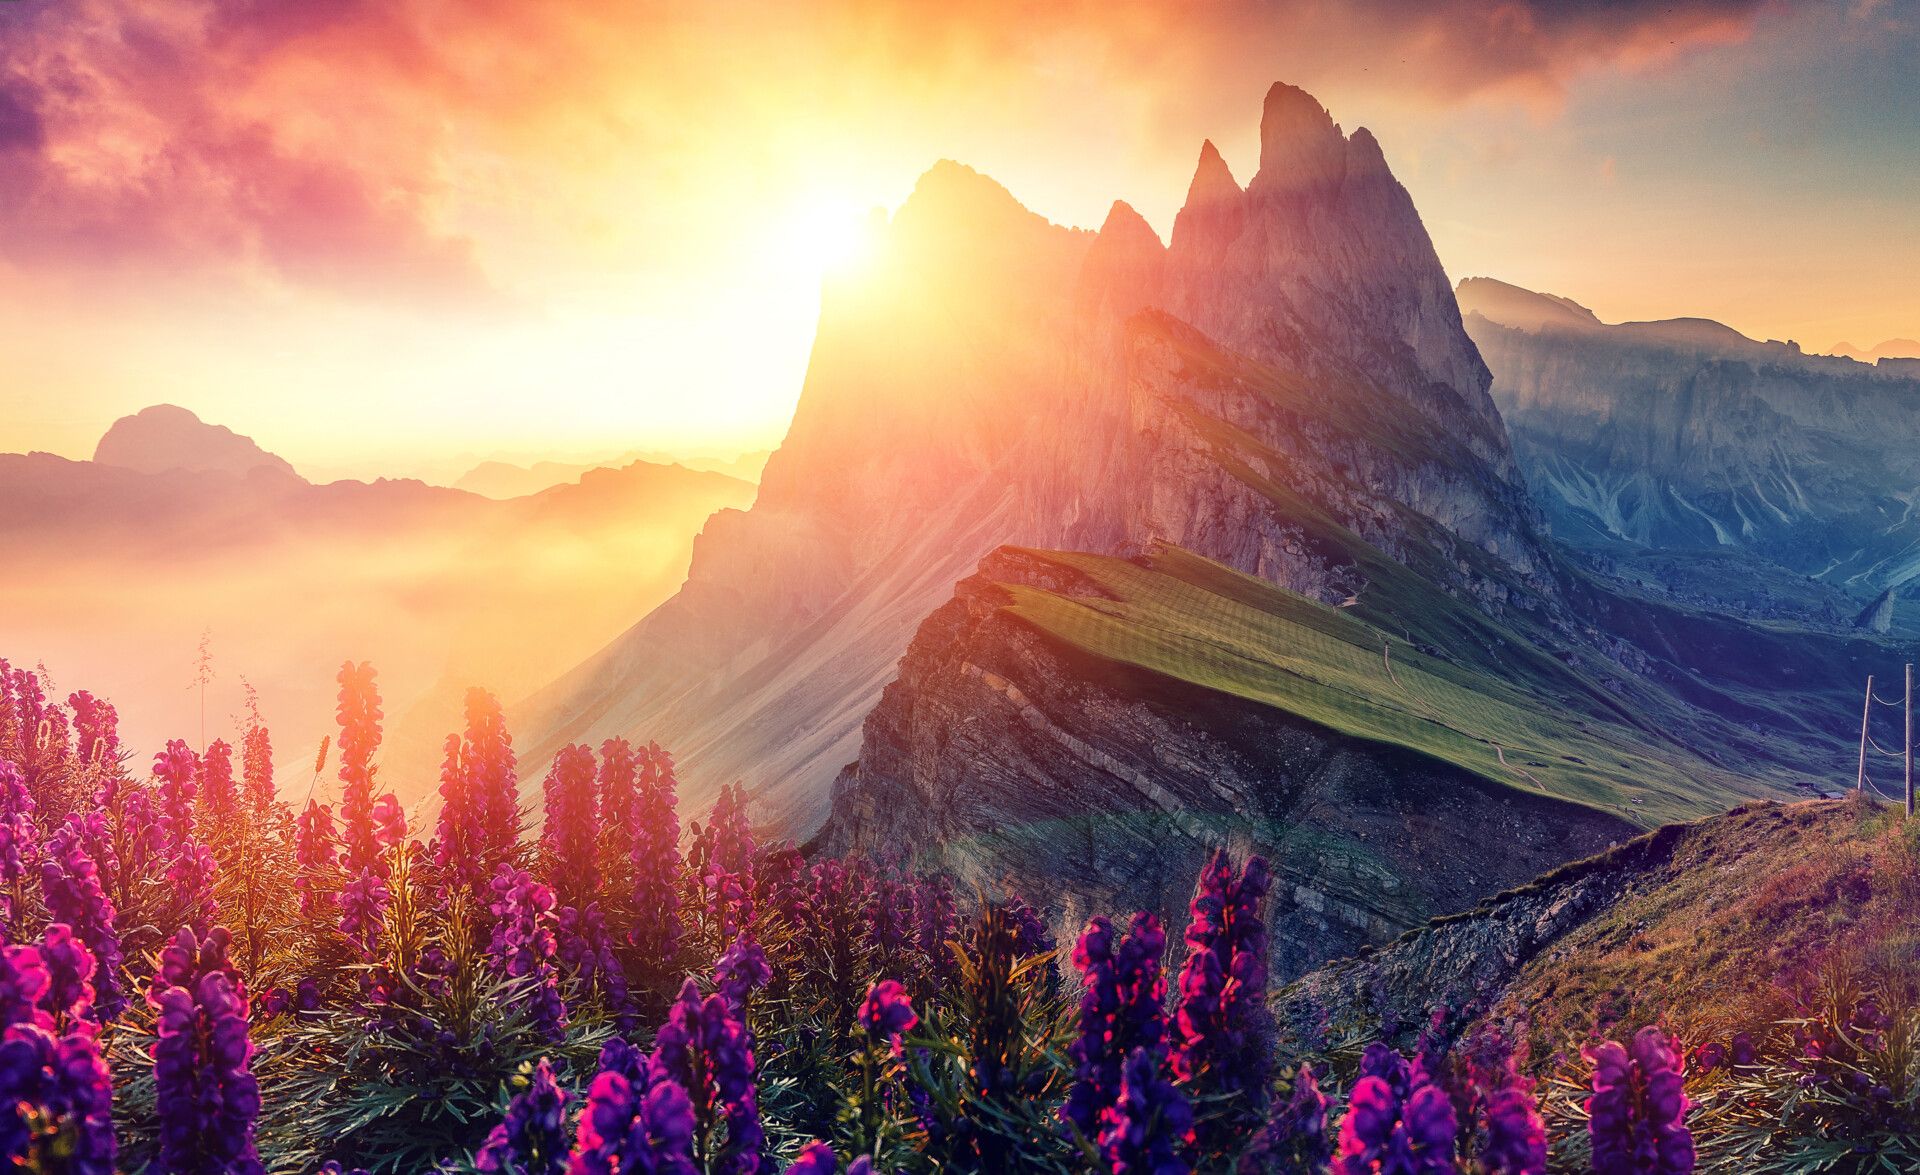 Sunrise over the mountains with purple flowers blooming in foreground